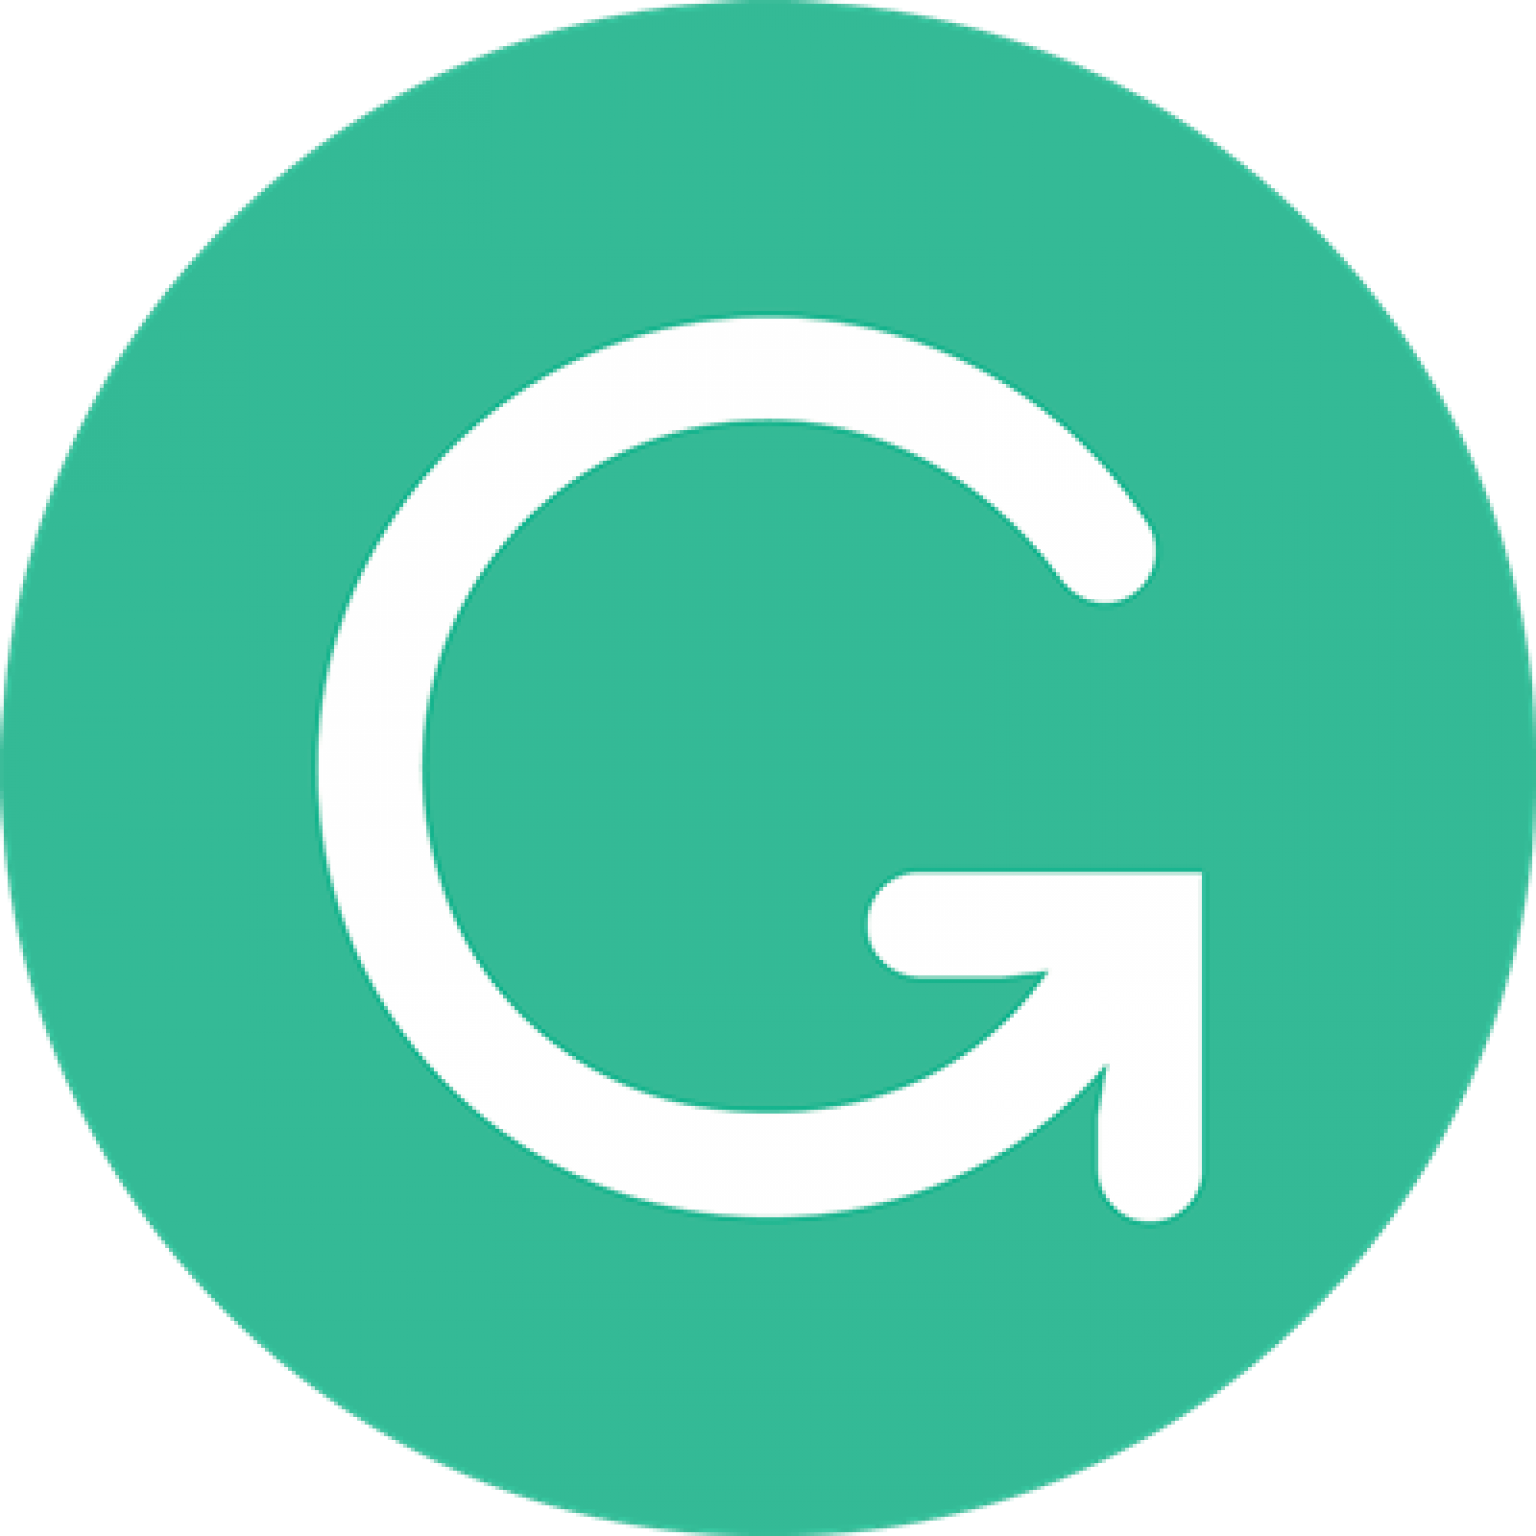 grammarly-download-review